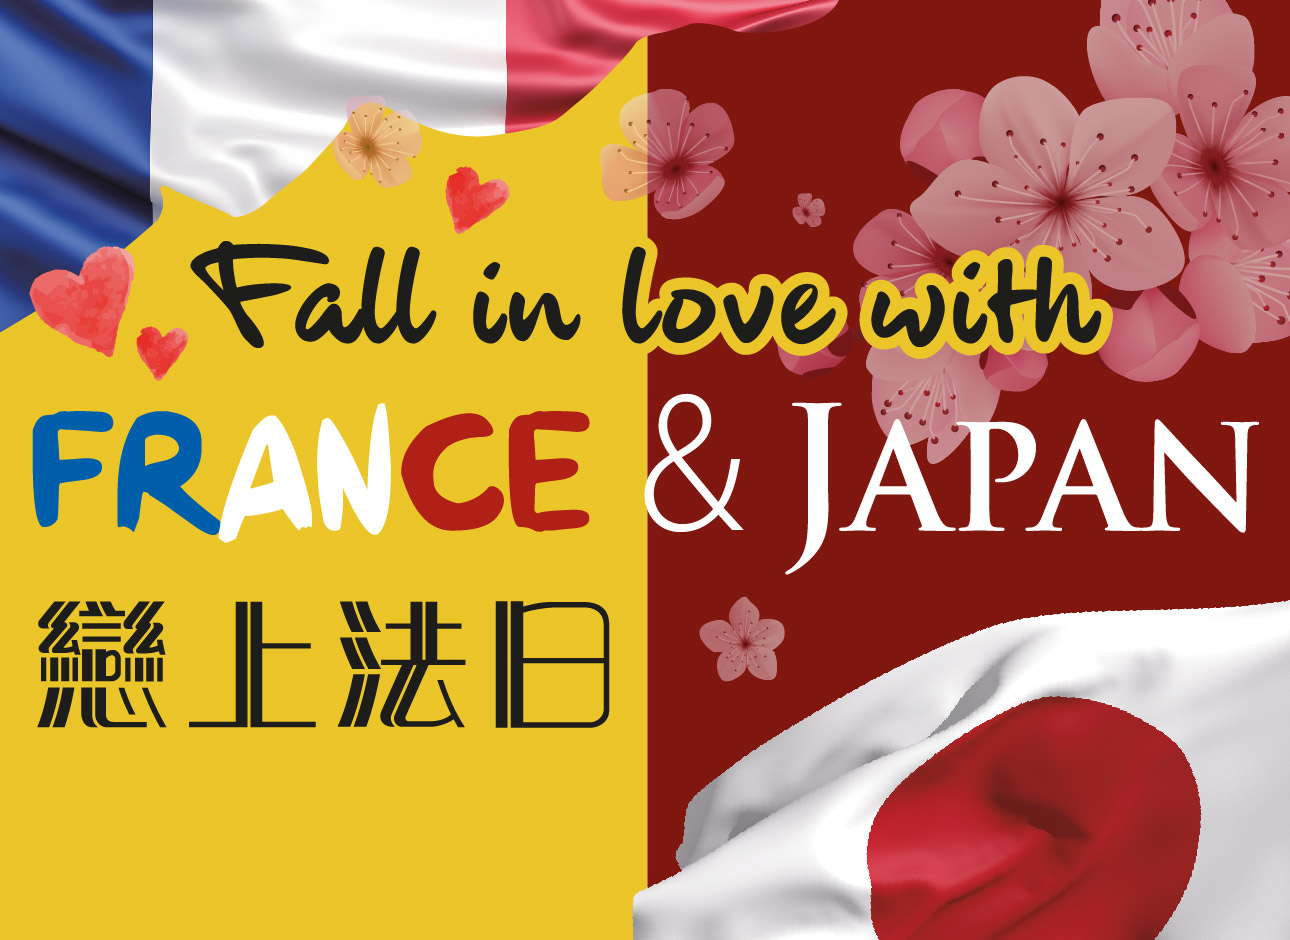 Sonata “Fall in Love with France and Japan” Seafood Dinner Buffet